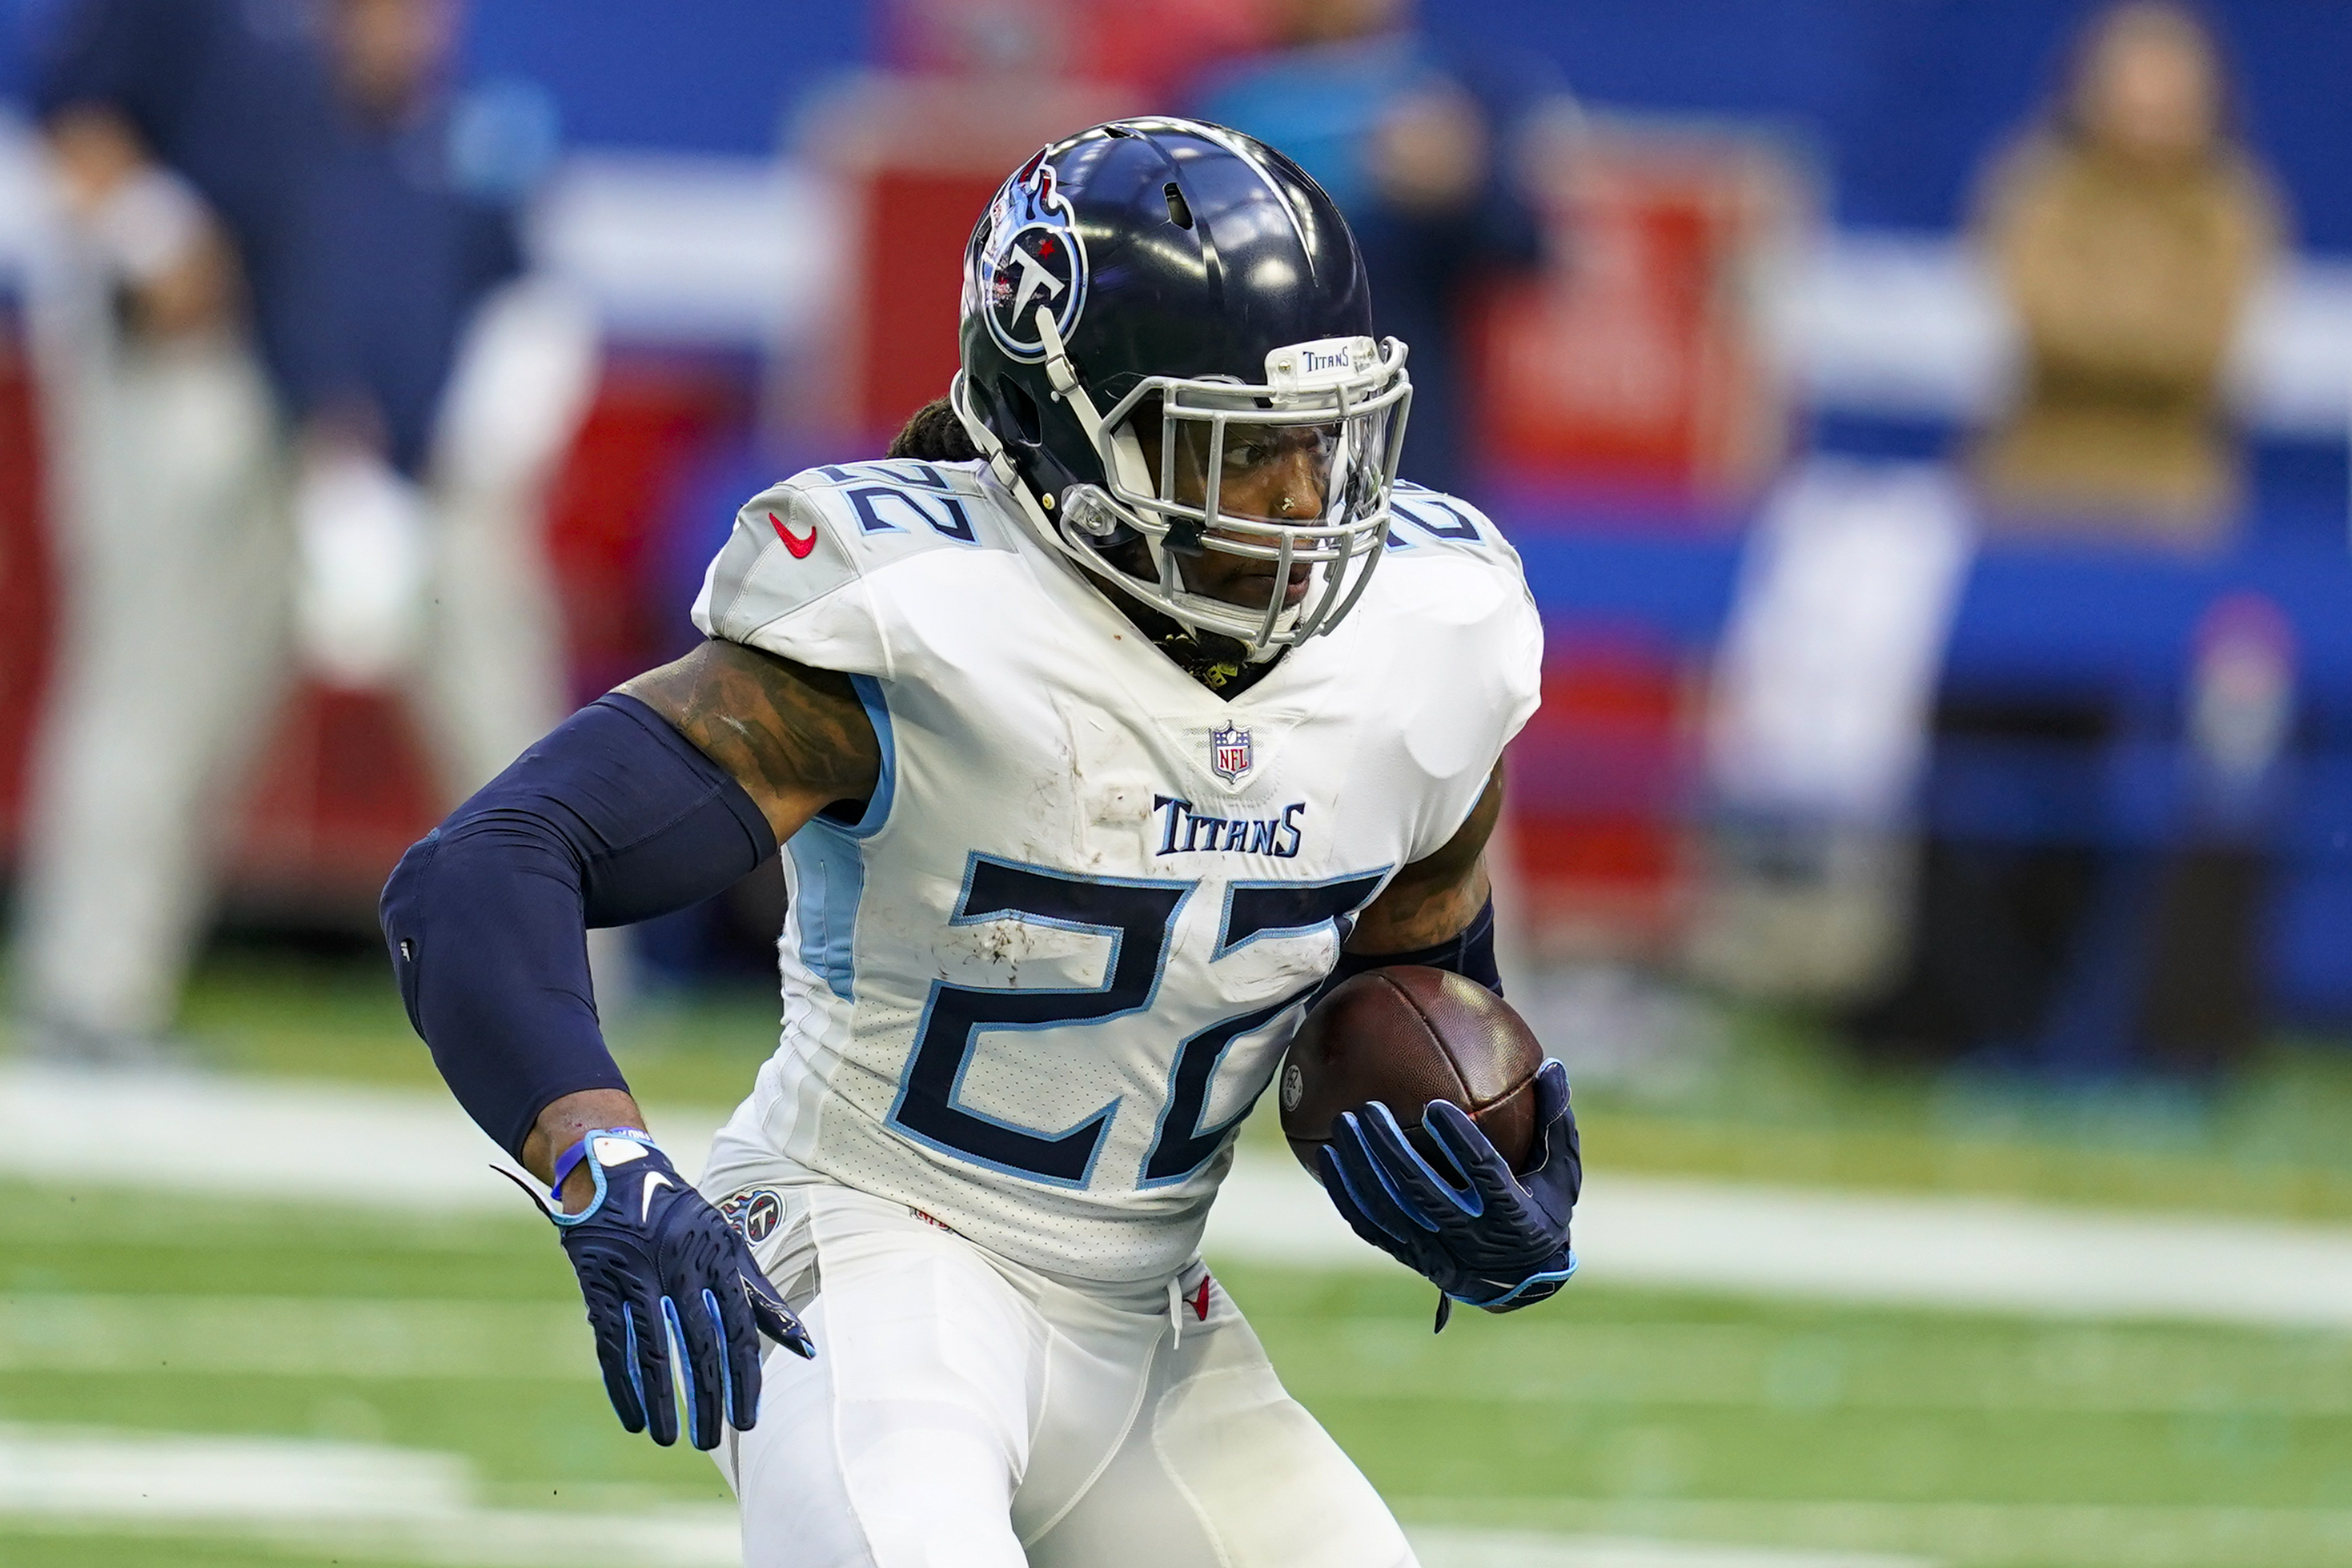 Cincinnati Bengals at Tennessee Titans (1/22/22): How to watch NFL